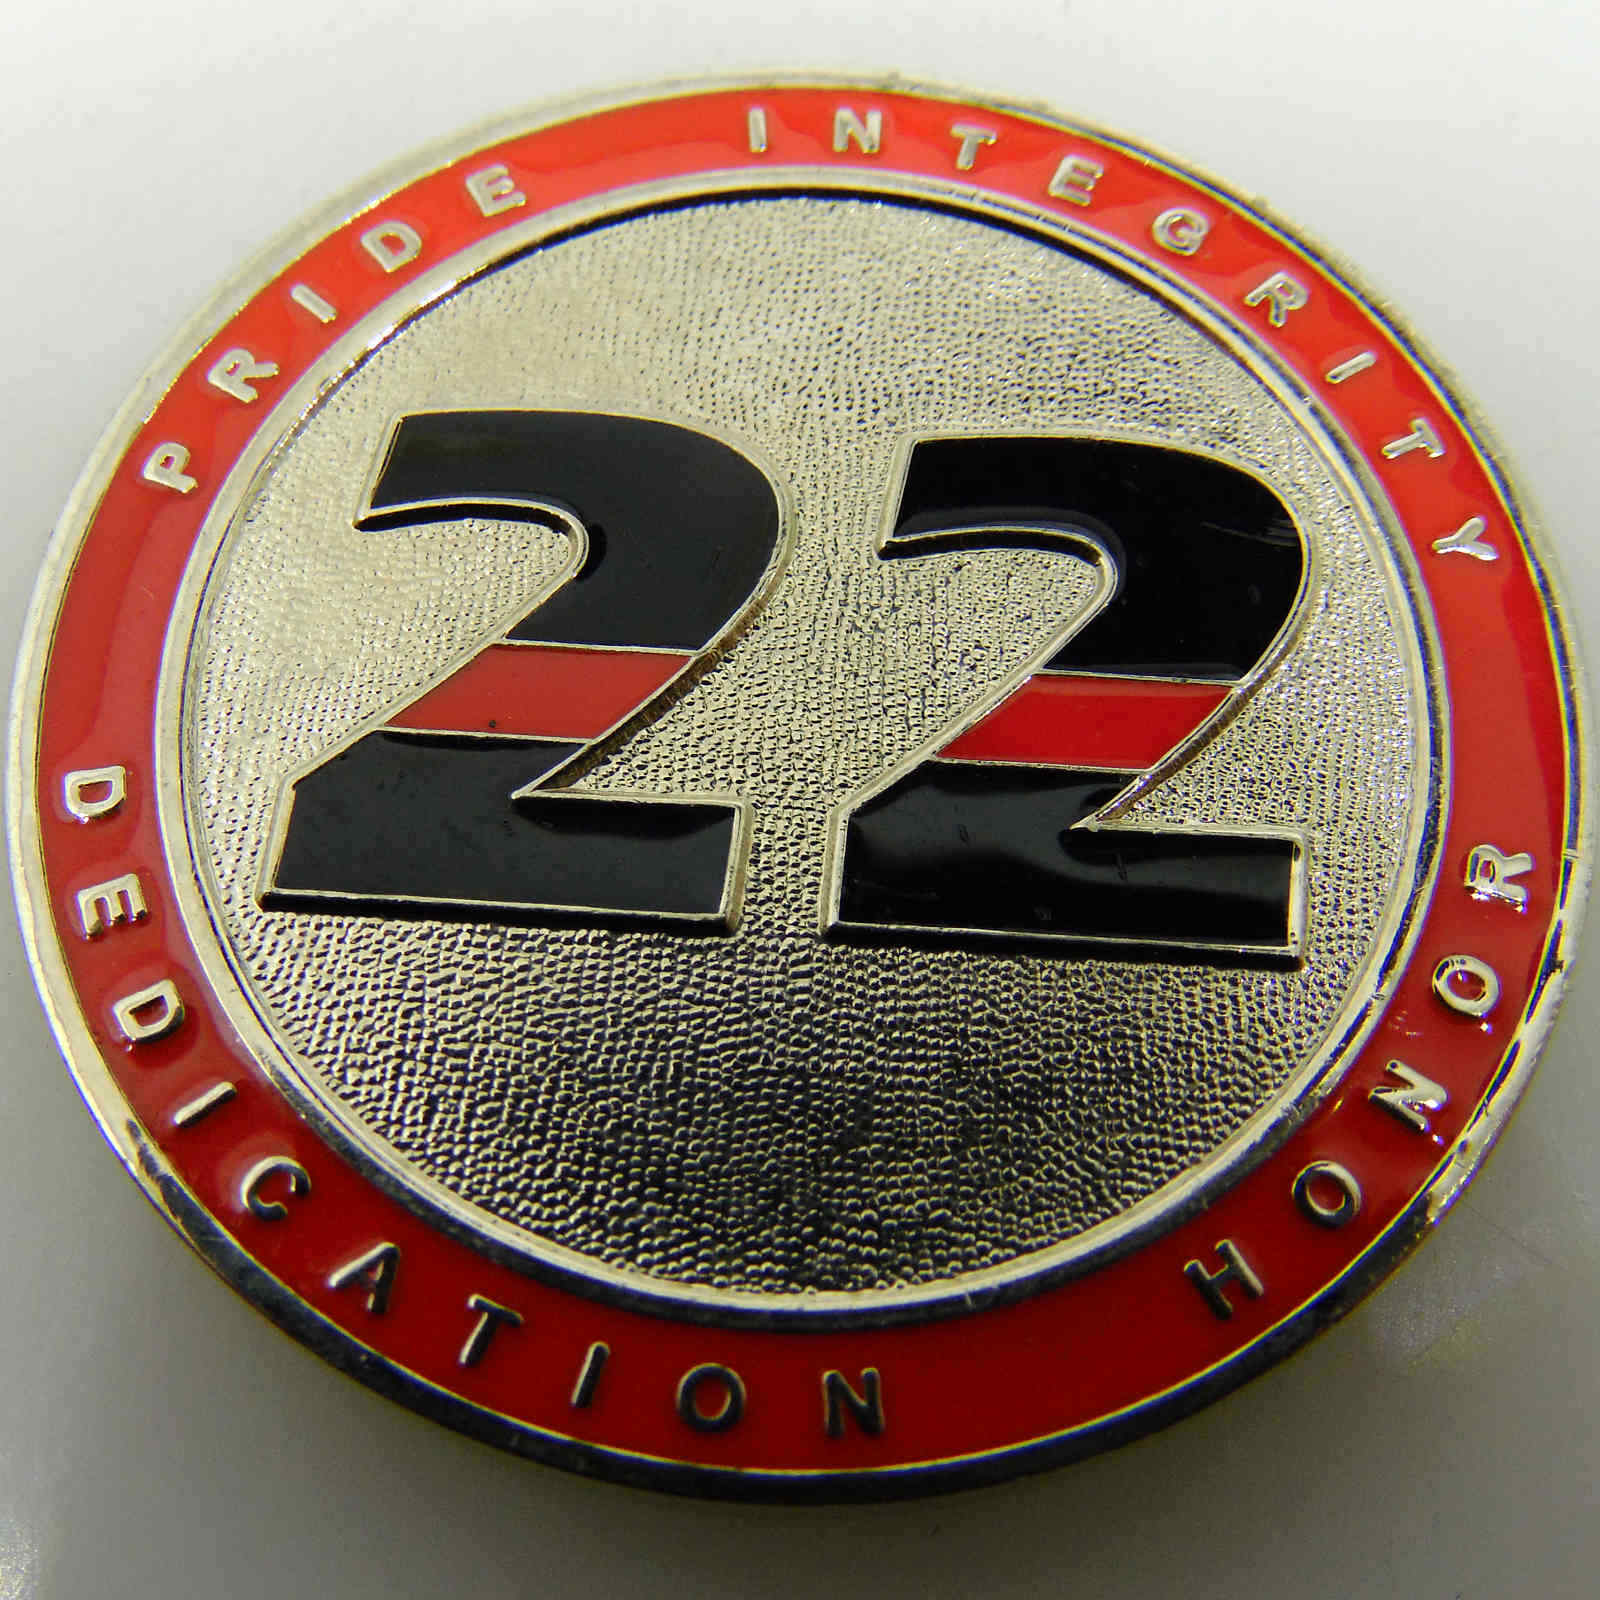 COVE CREEK FIRE STATION 22 CHALLENGE COIN